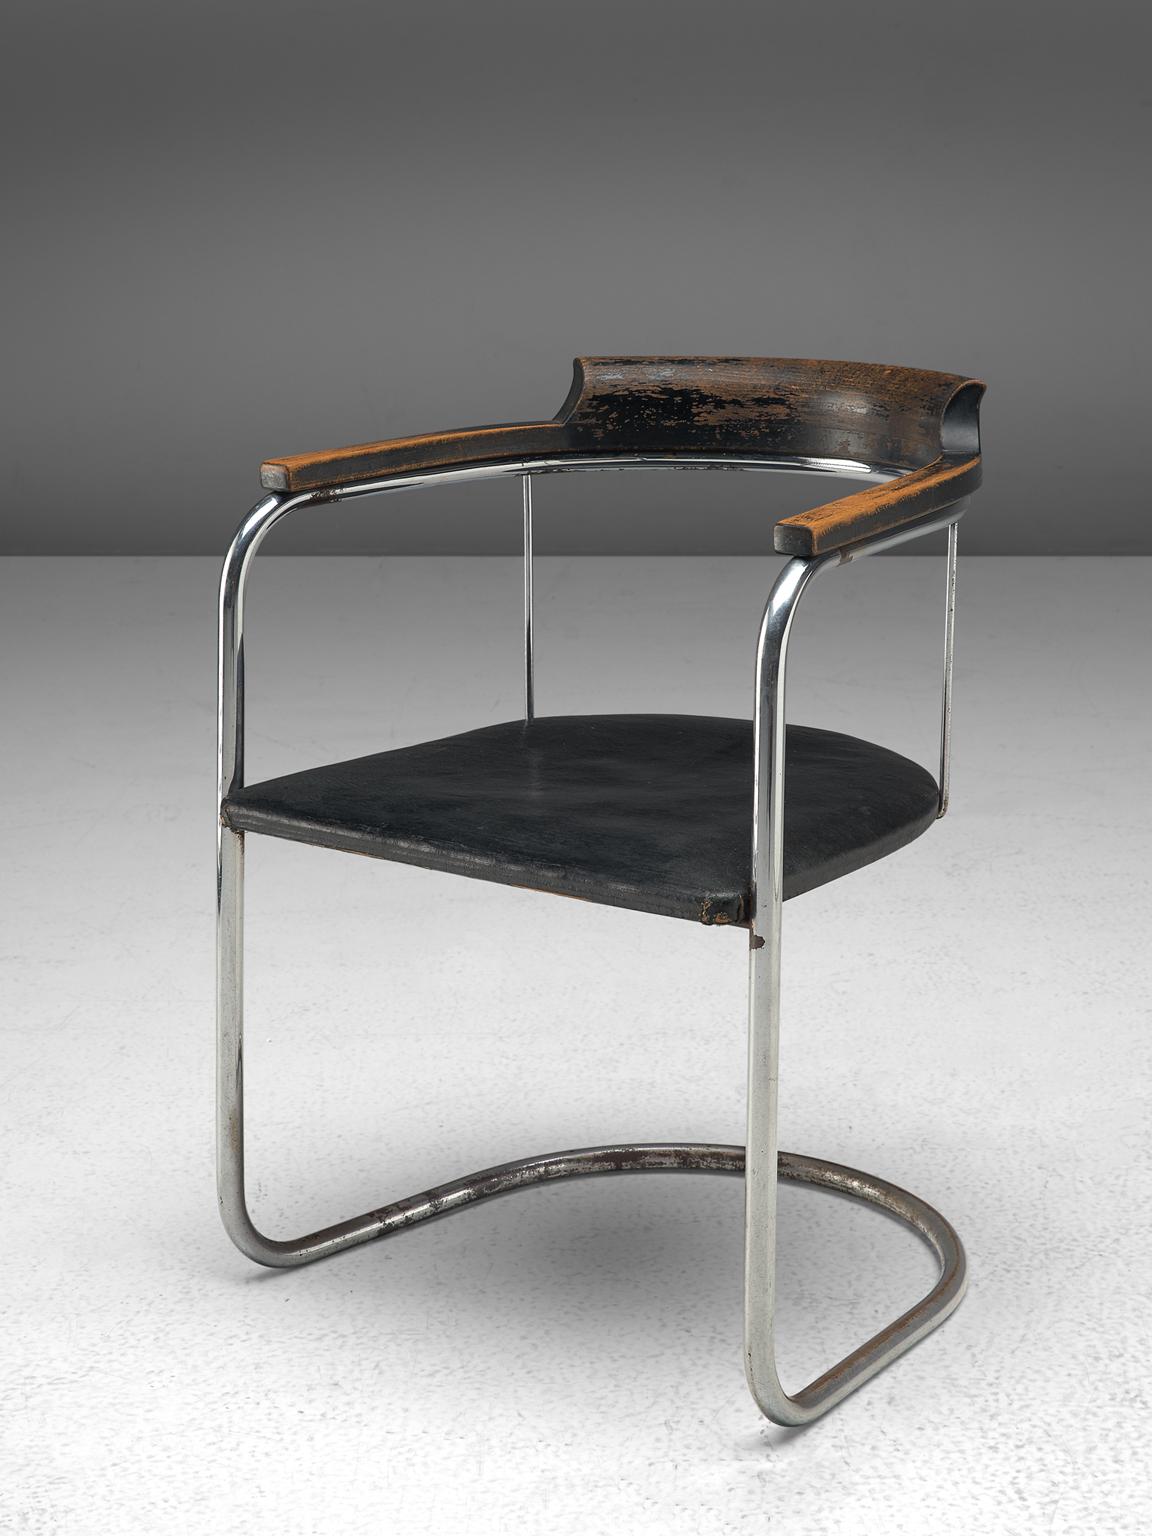 Fritz Hansen, armchair 'S125', wood, chromed steel and leather, Denmark, 1934.

Extraordinary tubular armchair manufactured by Fritz Hansen in 1934. It features a metal construction with a leather seat and wooden backrest that flows over to